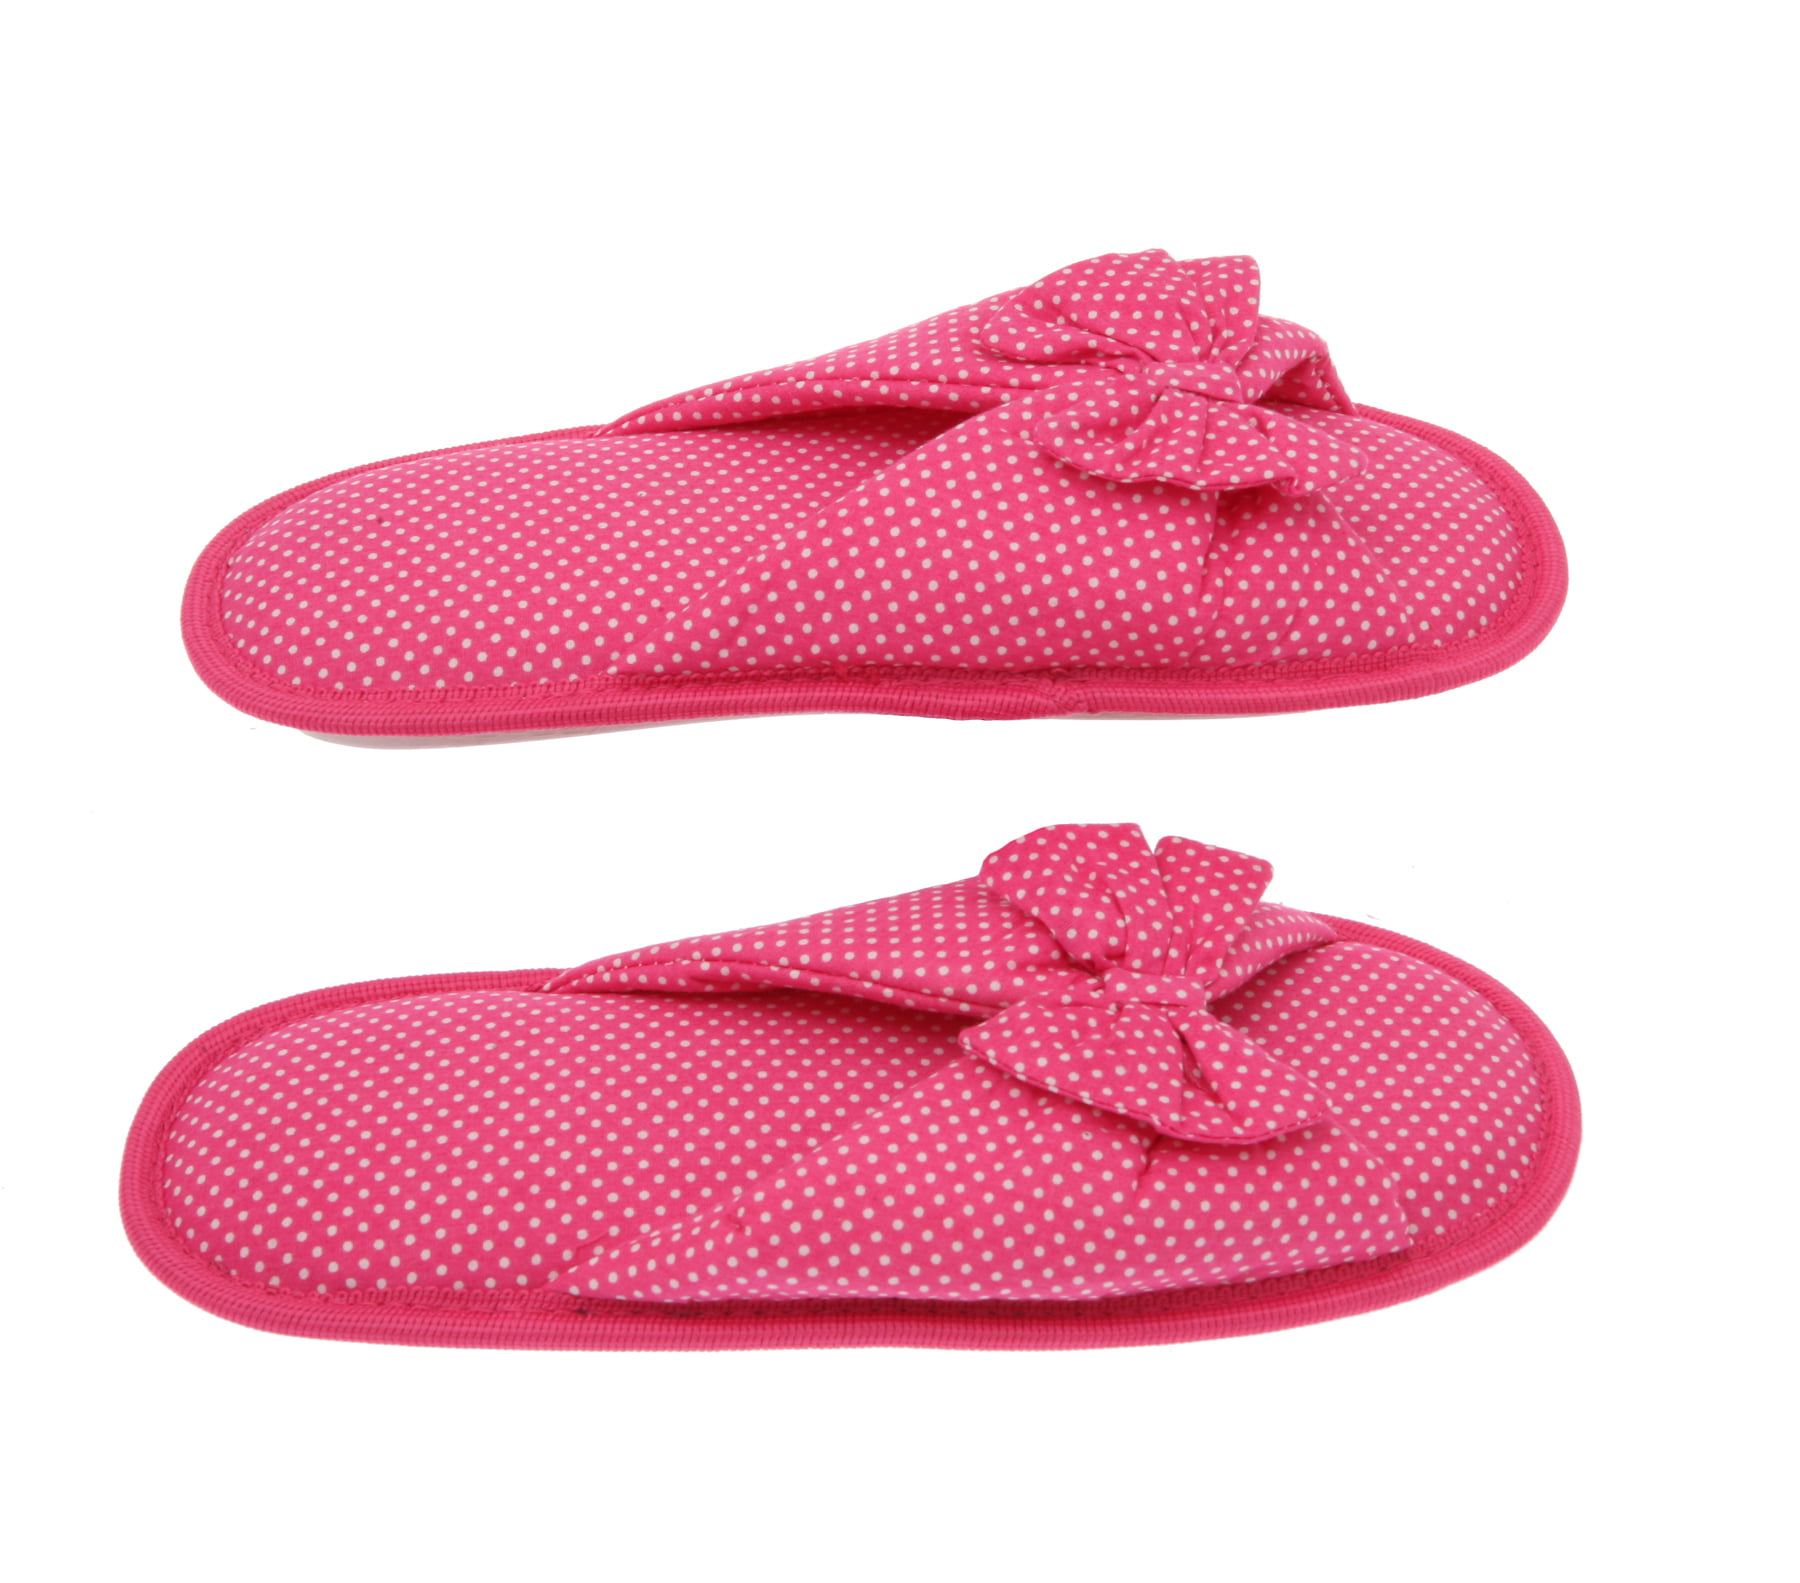 Bedroom Slippers For Kids Cotton Slippers Girls Boys Slippers Memory Foam  Comfy House Slippers Winter Warm Indoor Shoes Girls Bunny Slippers - Walmart .com